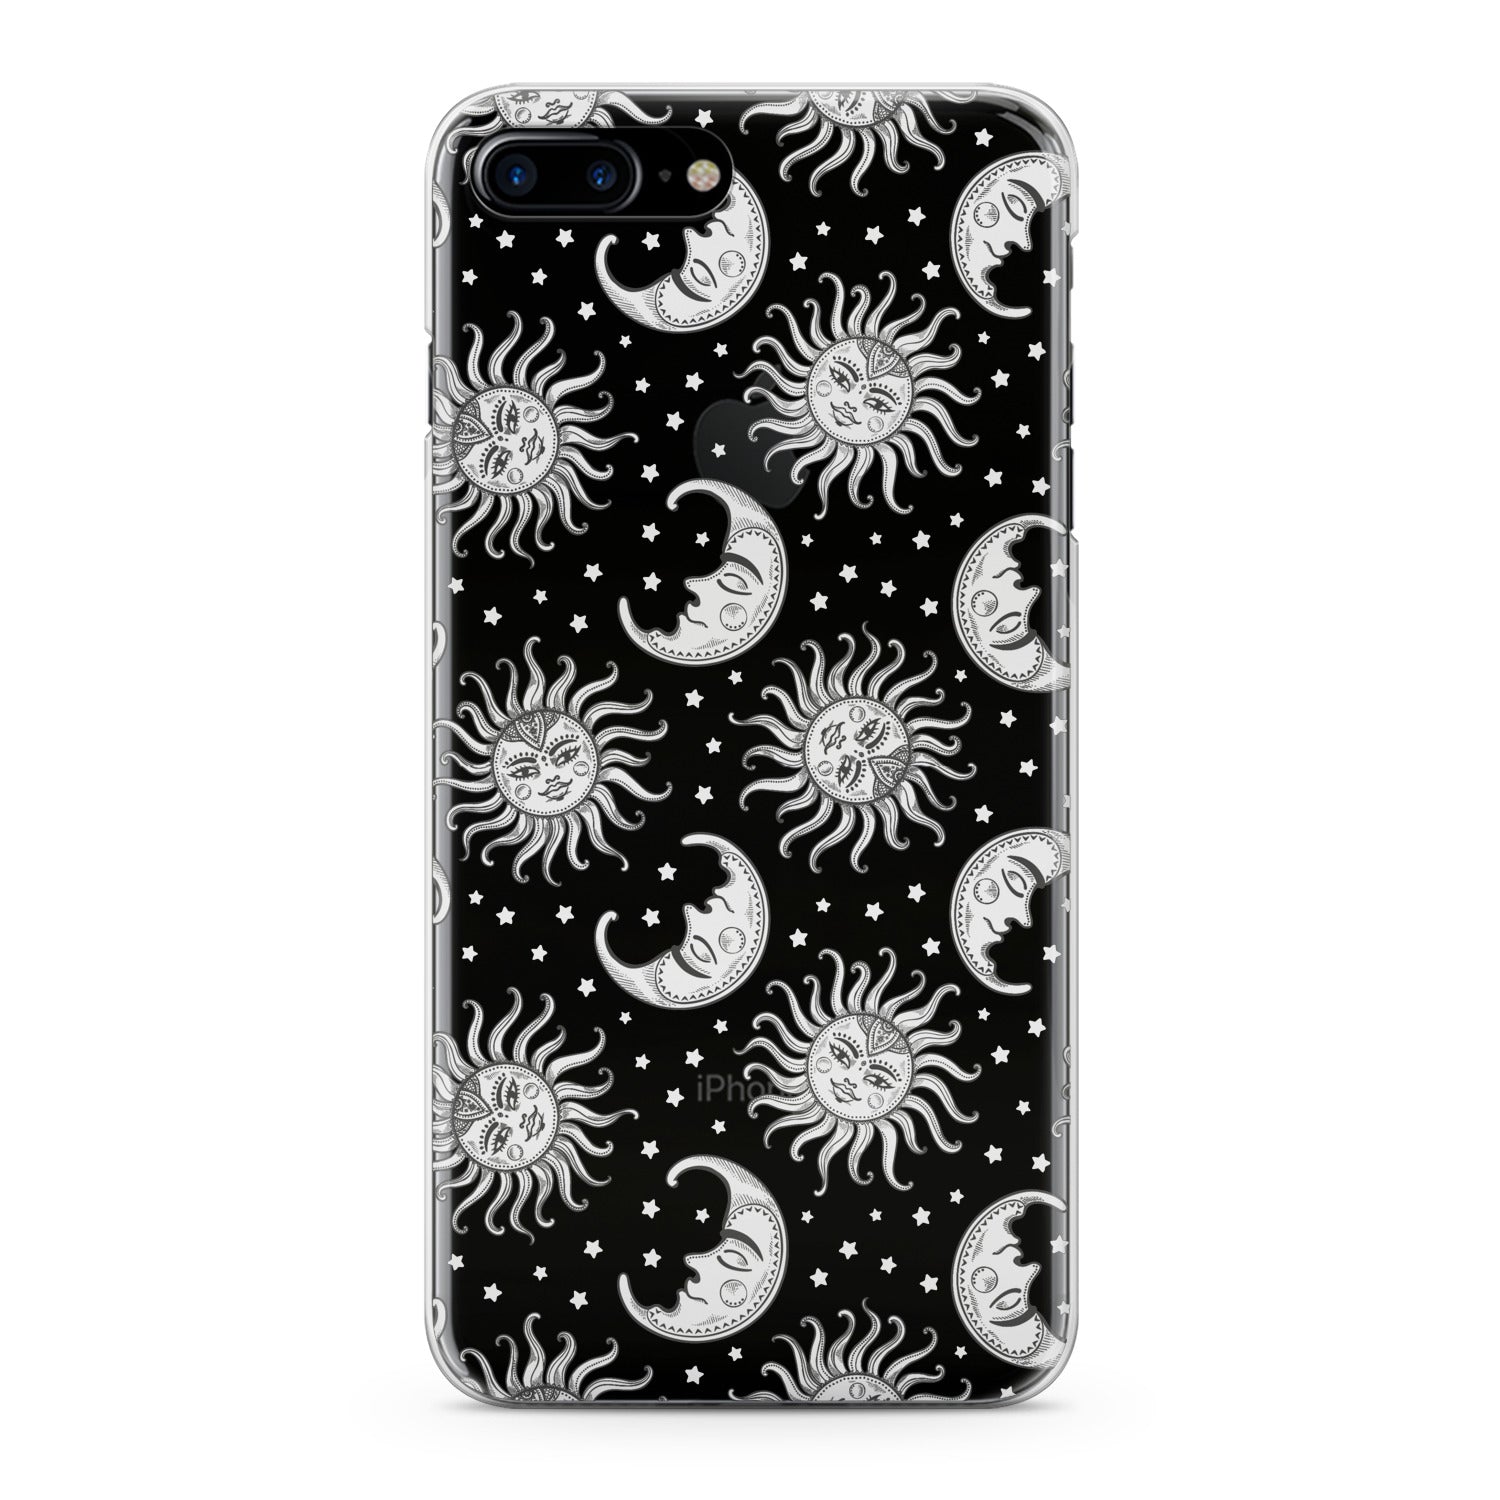 Lex Altern Celestial Print Phone Case for your iPhone & Android phone.